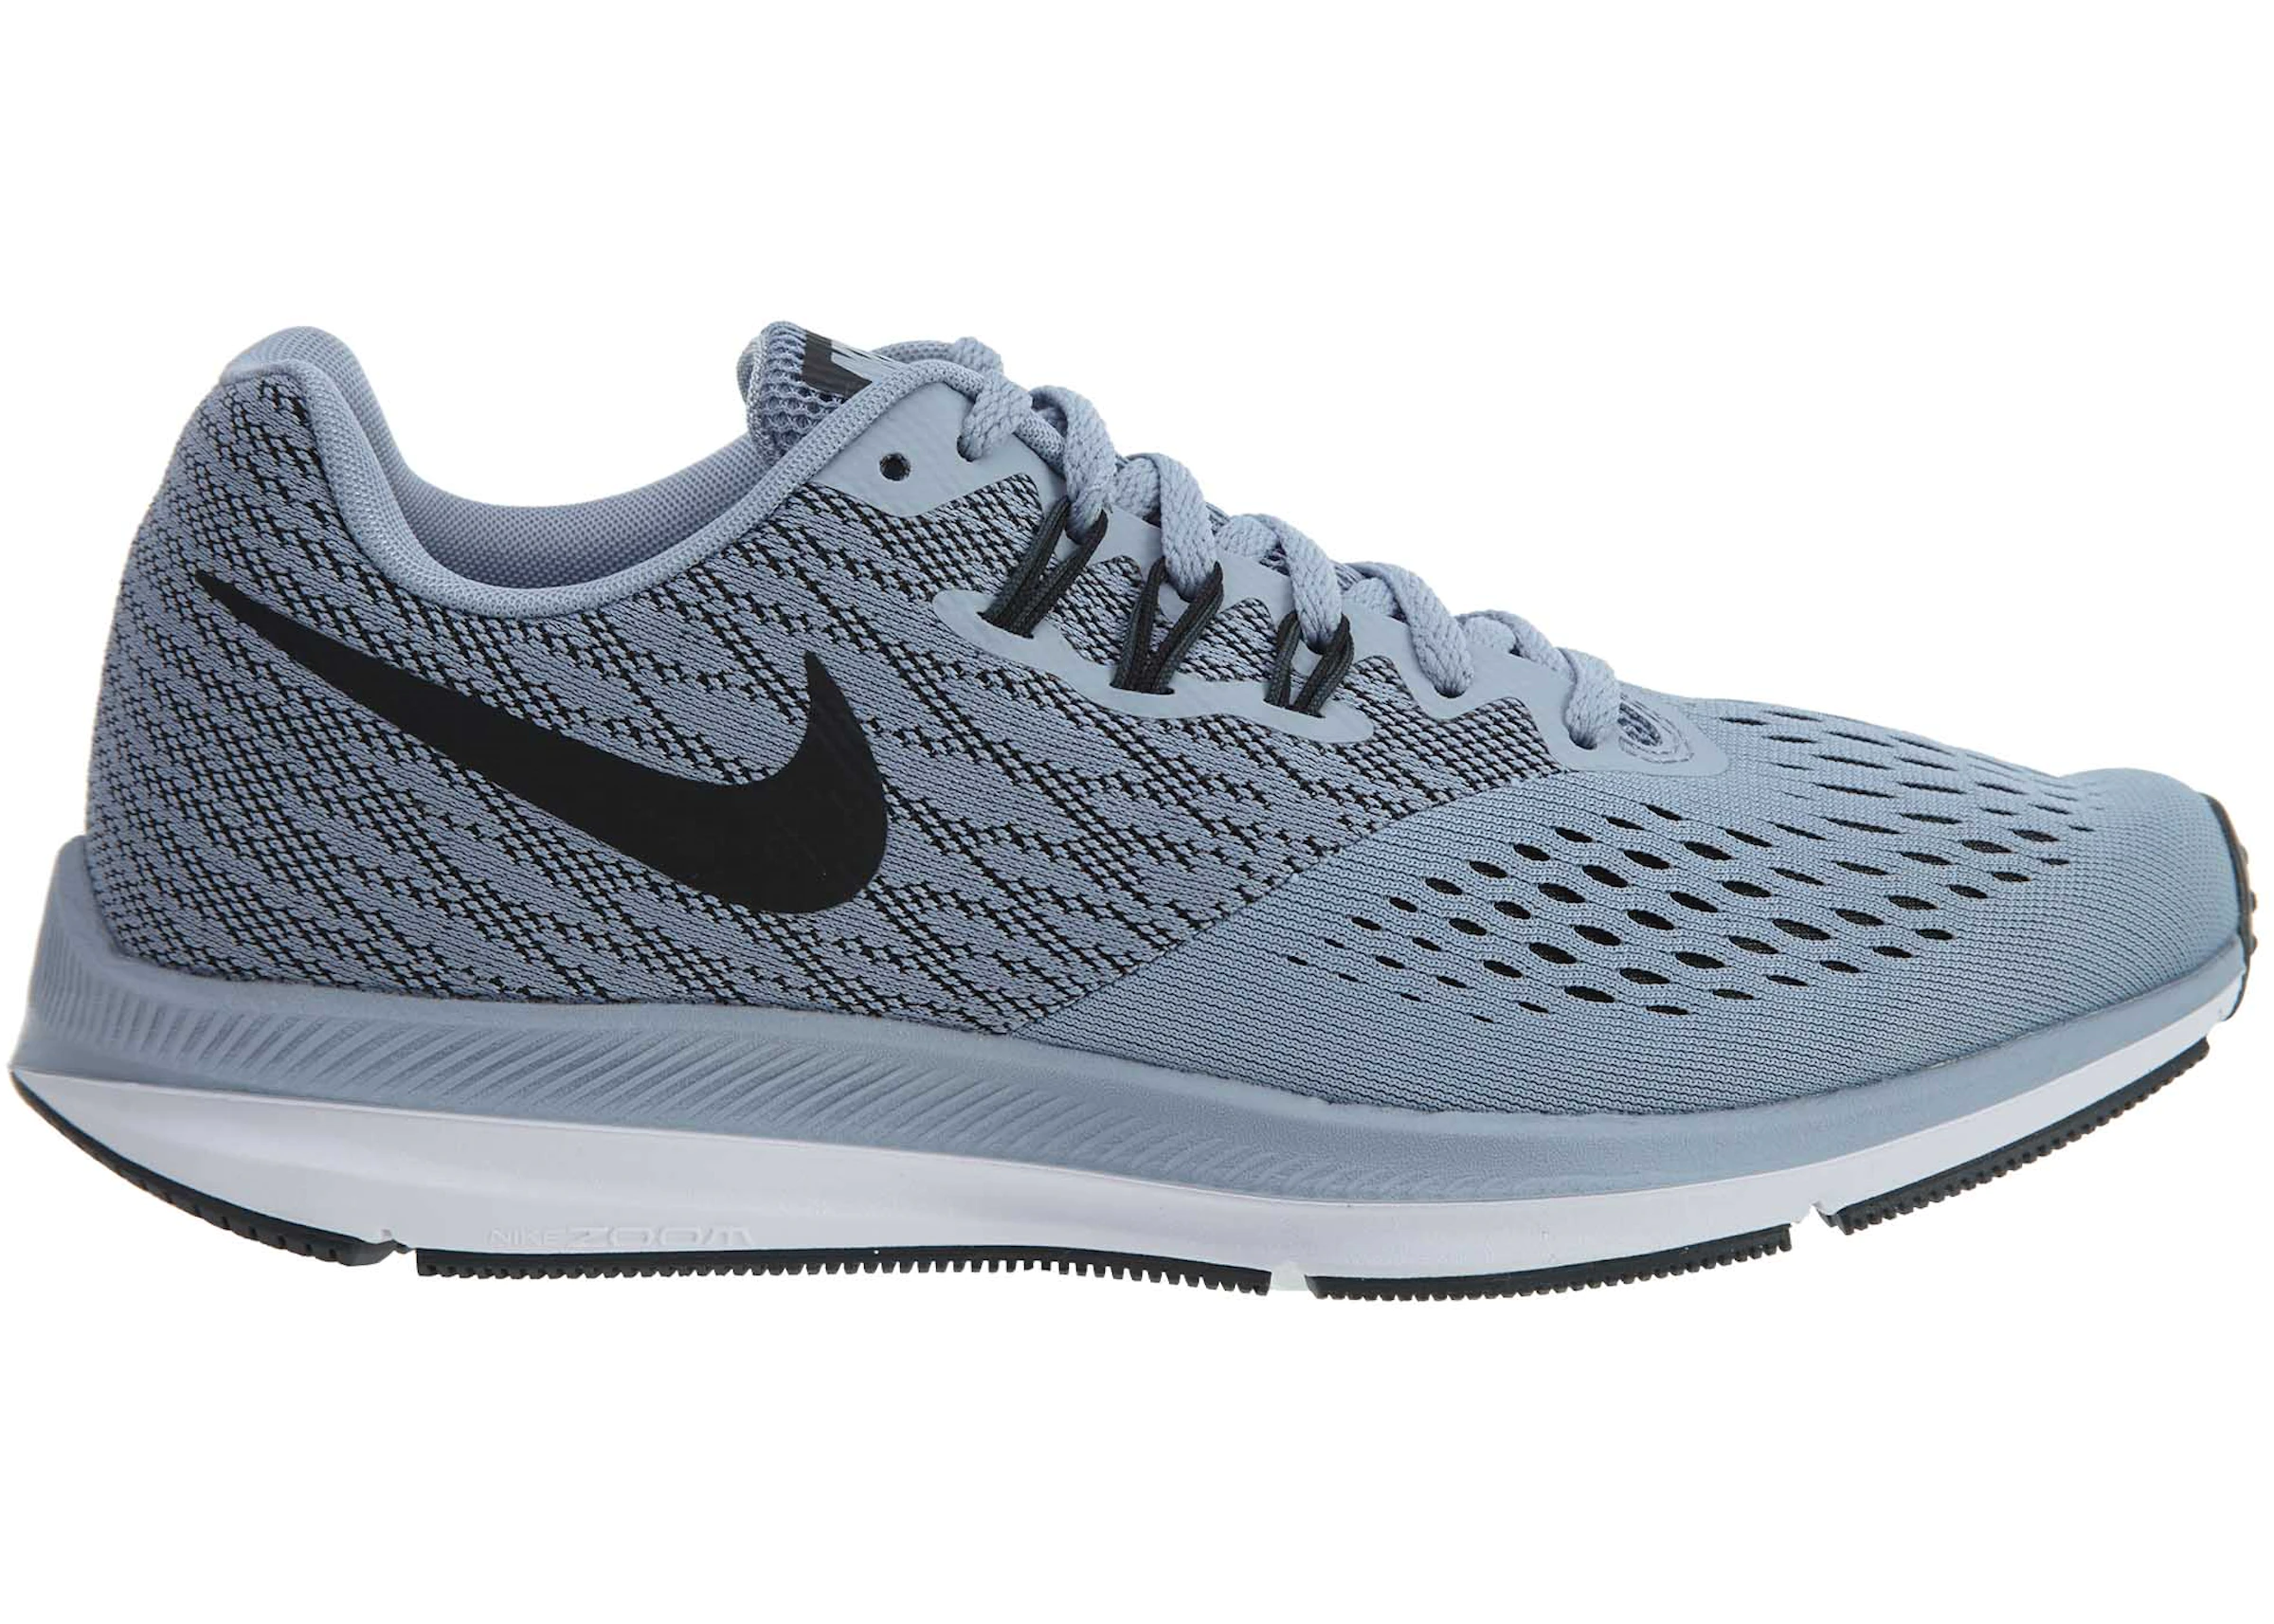 breaking Dawn vision chance Nike Zoom Winflo 4 Glacier Grey/Black-Anthracite - 898466-008 - US